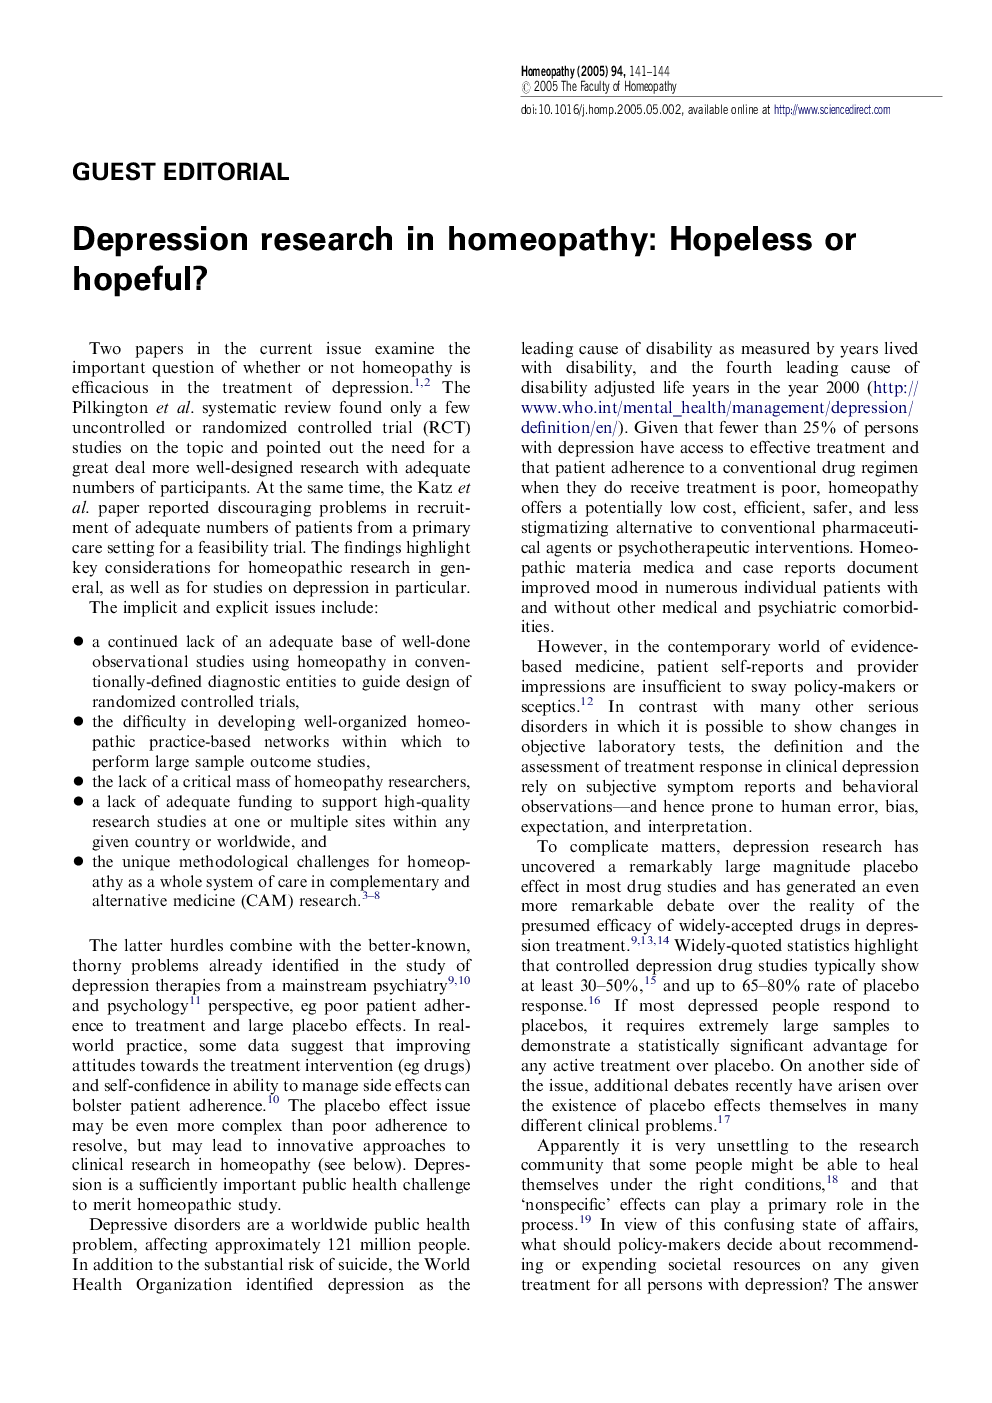 Depression research in homeopathy: Hopeless or hopeful?